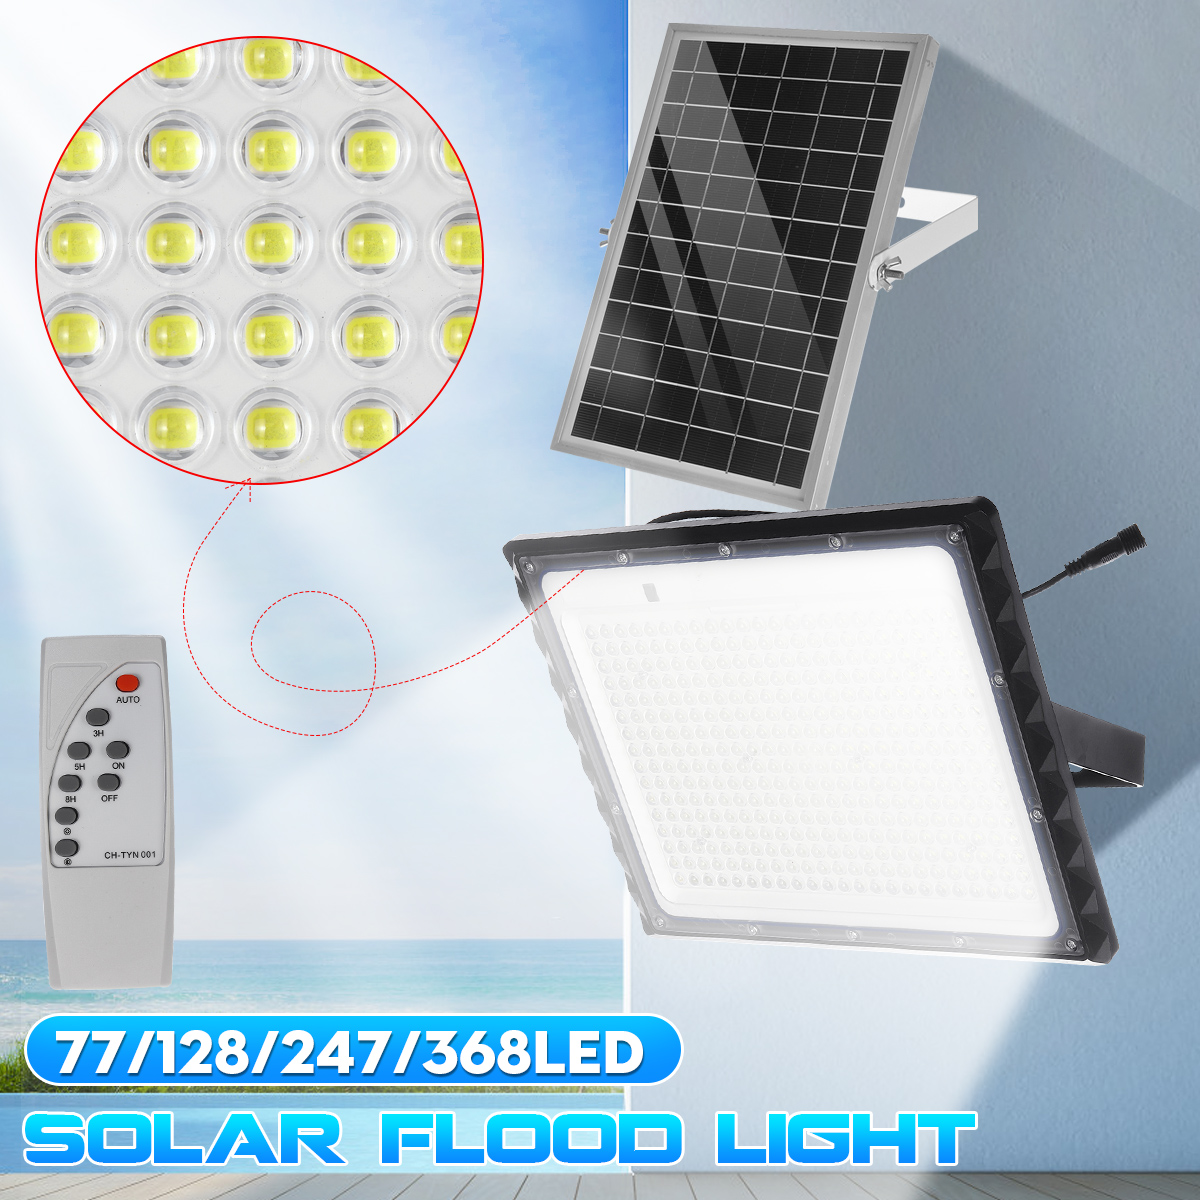 77128247368LED-Solar-Flood-Light-SMD2835-Outdoor-Garden-Street-Wall-Lamp--Remote-Control-1754920-1